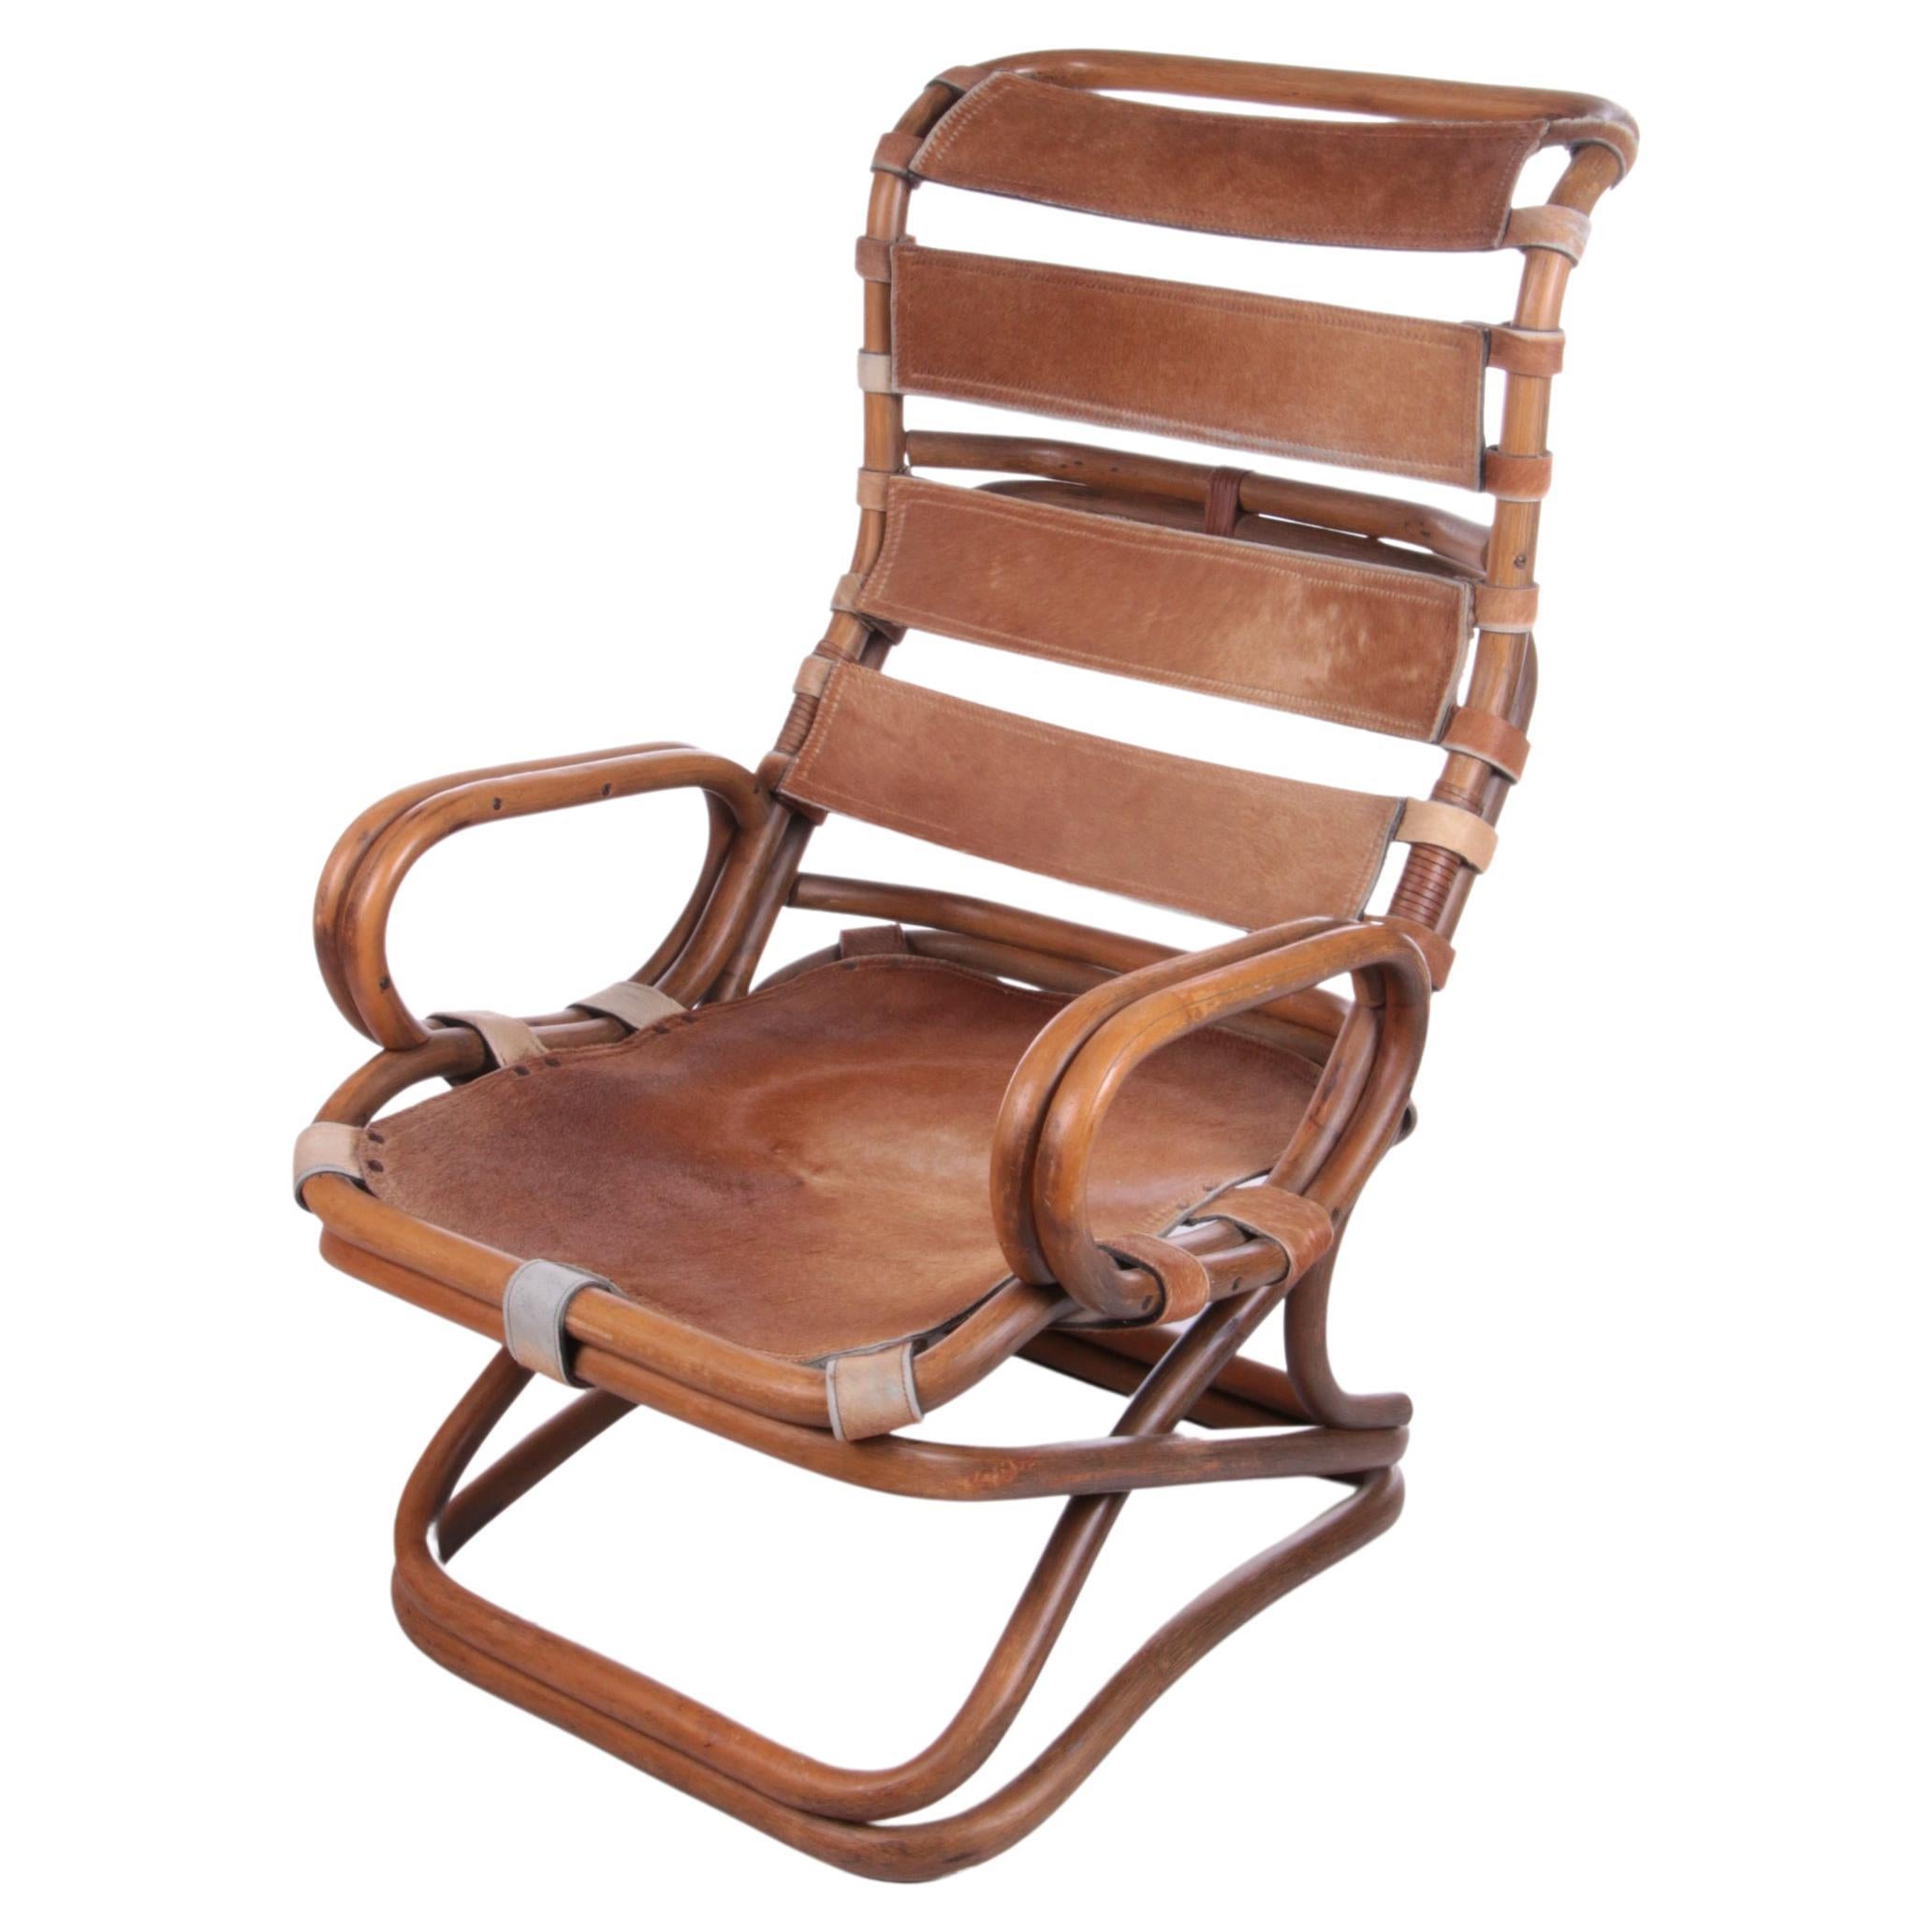 Tito Agnoli Relax Chair Made of Bamboo and Leather, 1960